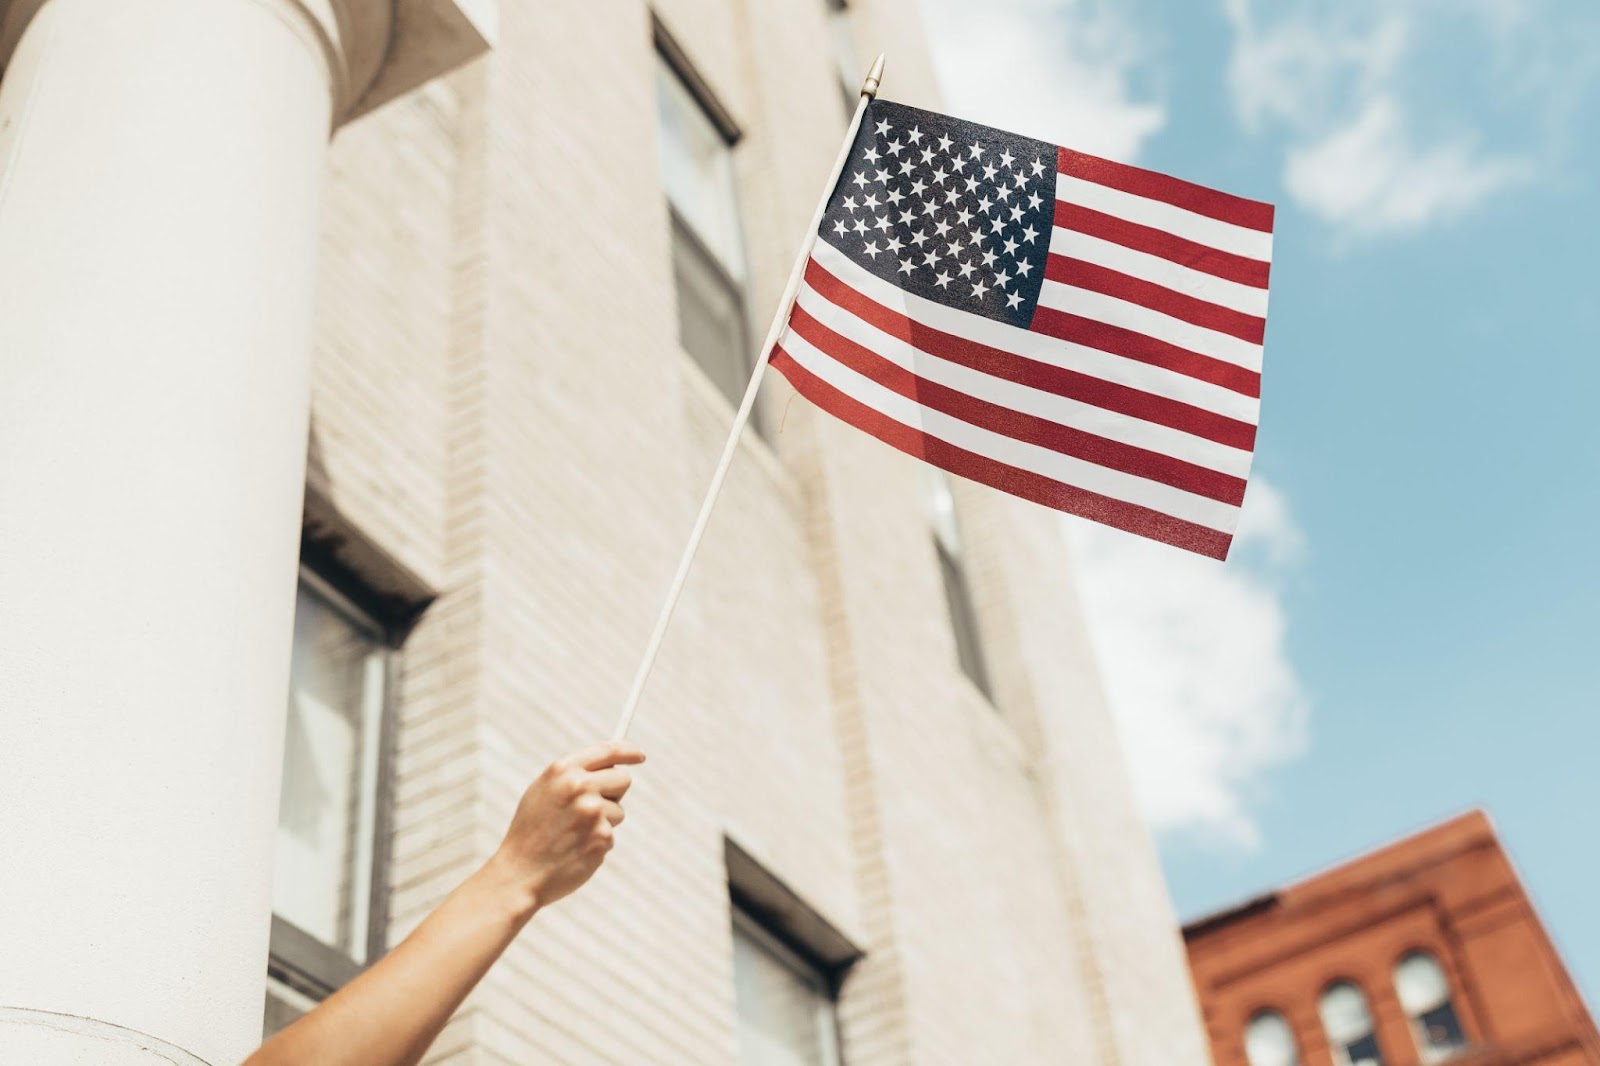 a person holding up an American flag